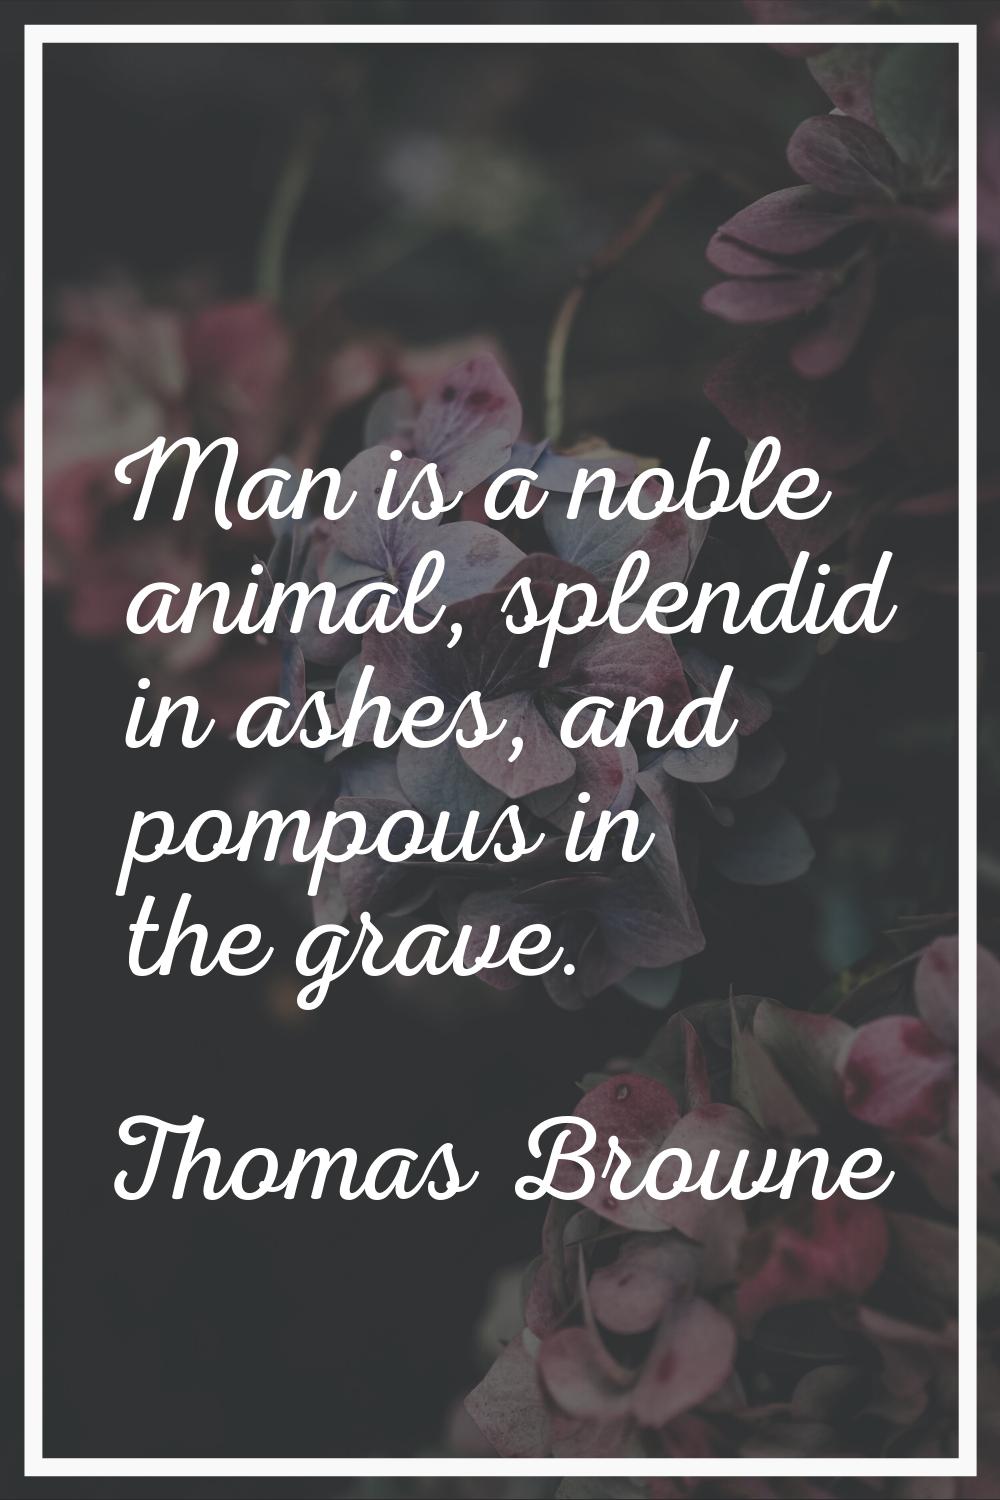 Man is a noble animal, splendid in ashes, and pompous in the grave.